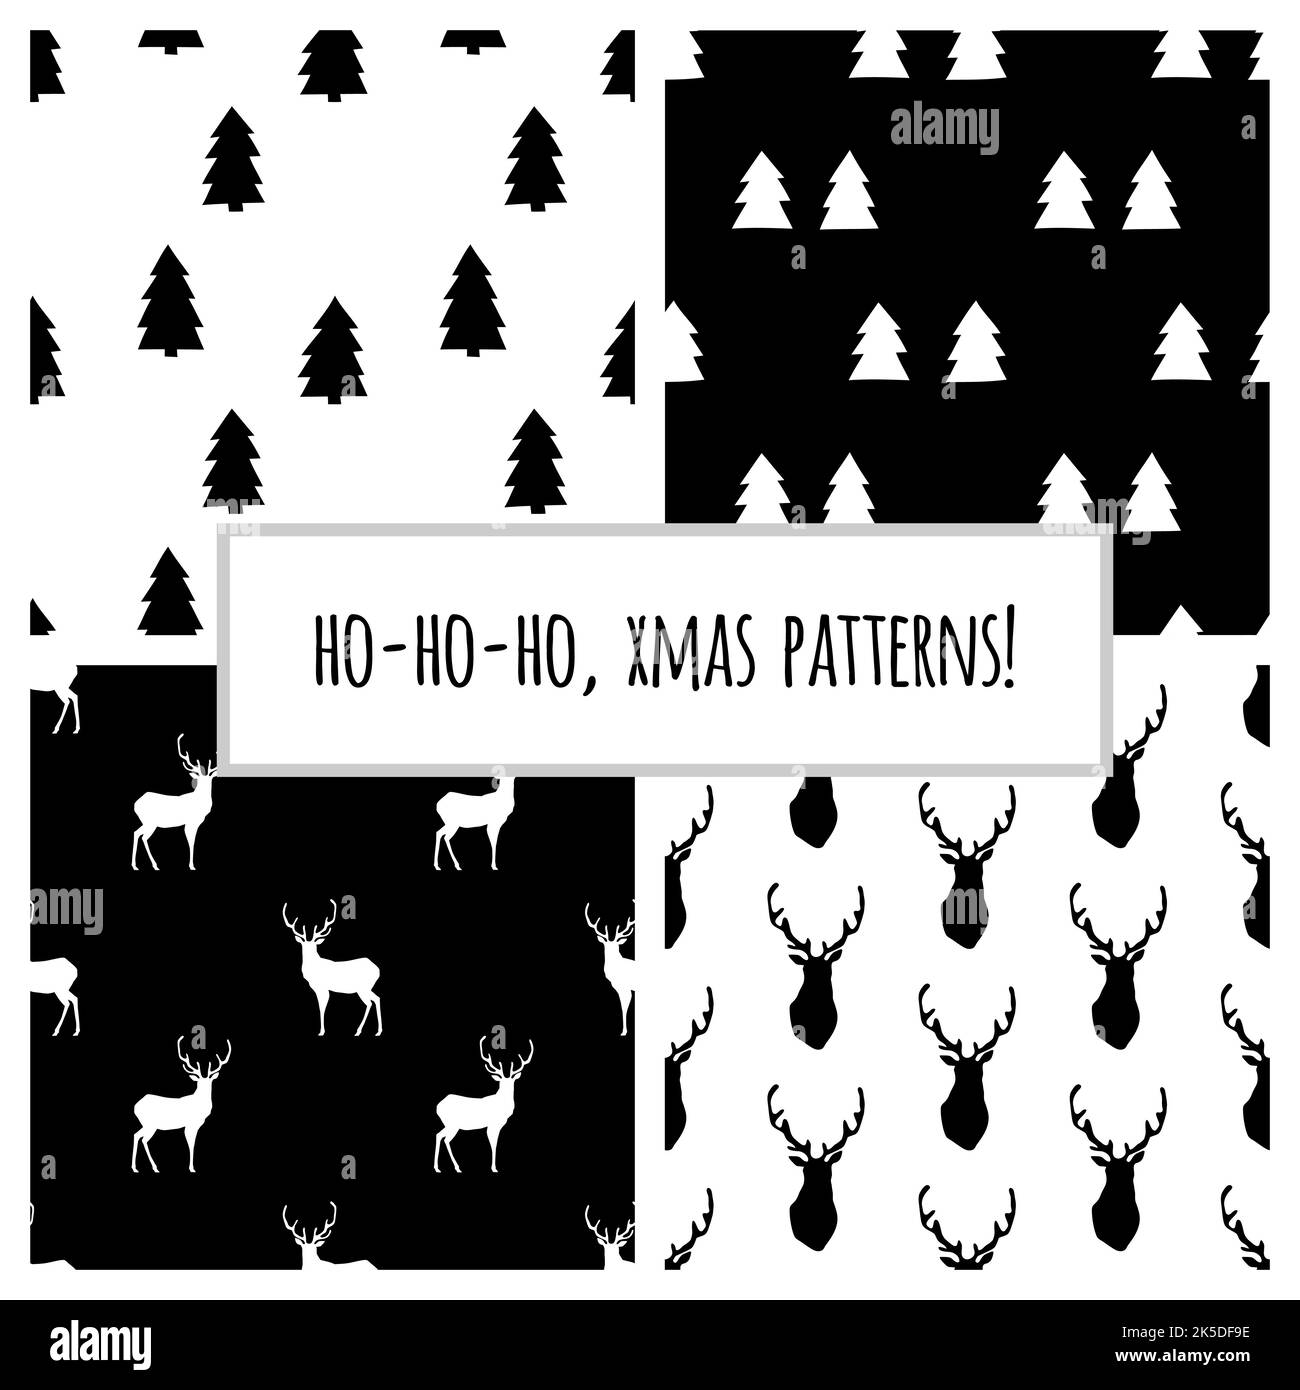 Snowflake seamless pattern. Christmas wrapping paper. Holiday hand drawn  geometric repeat simple ornate. Snow vector silhouette elements.  Scandinavian nordic design for print backdrop card, textile. Stock Vector